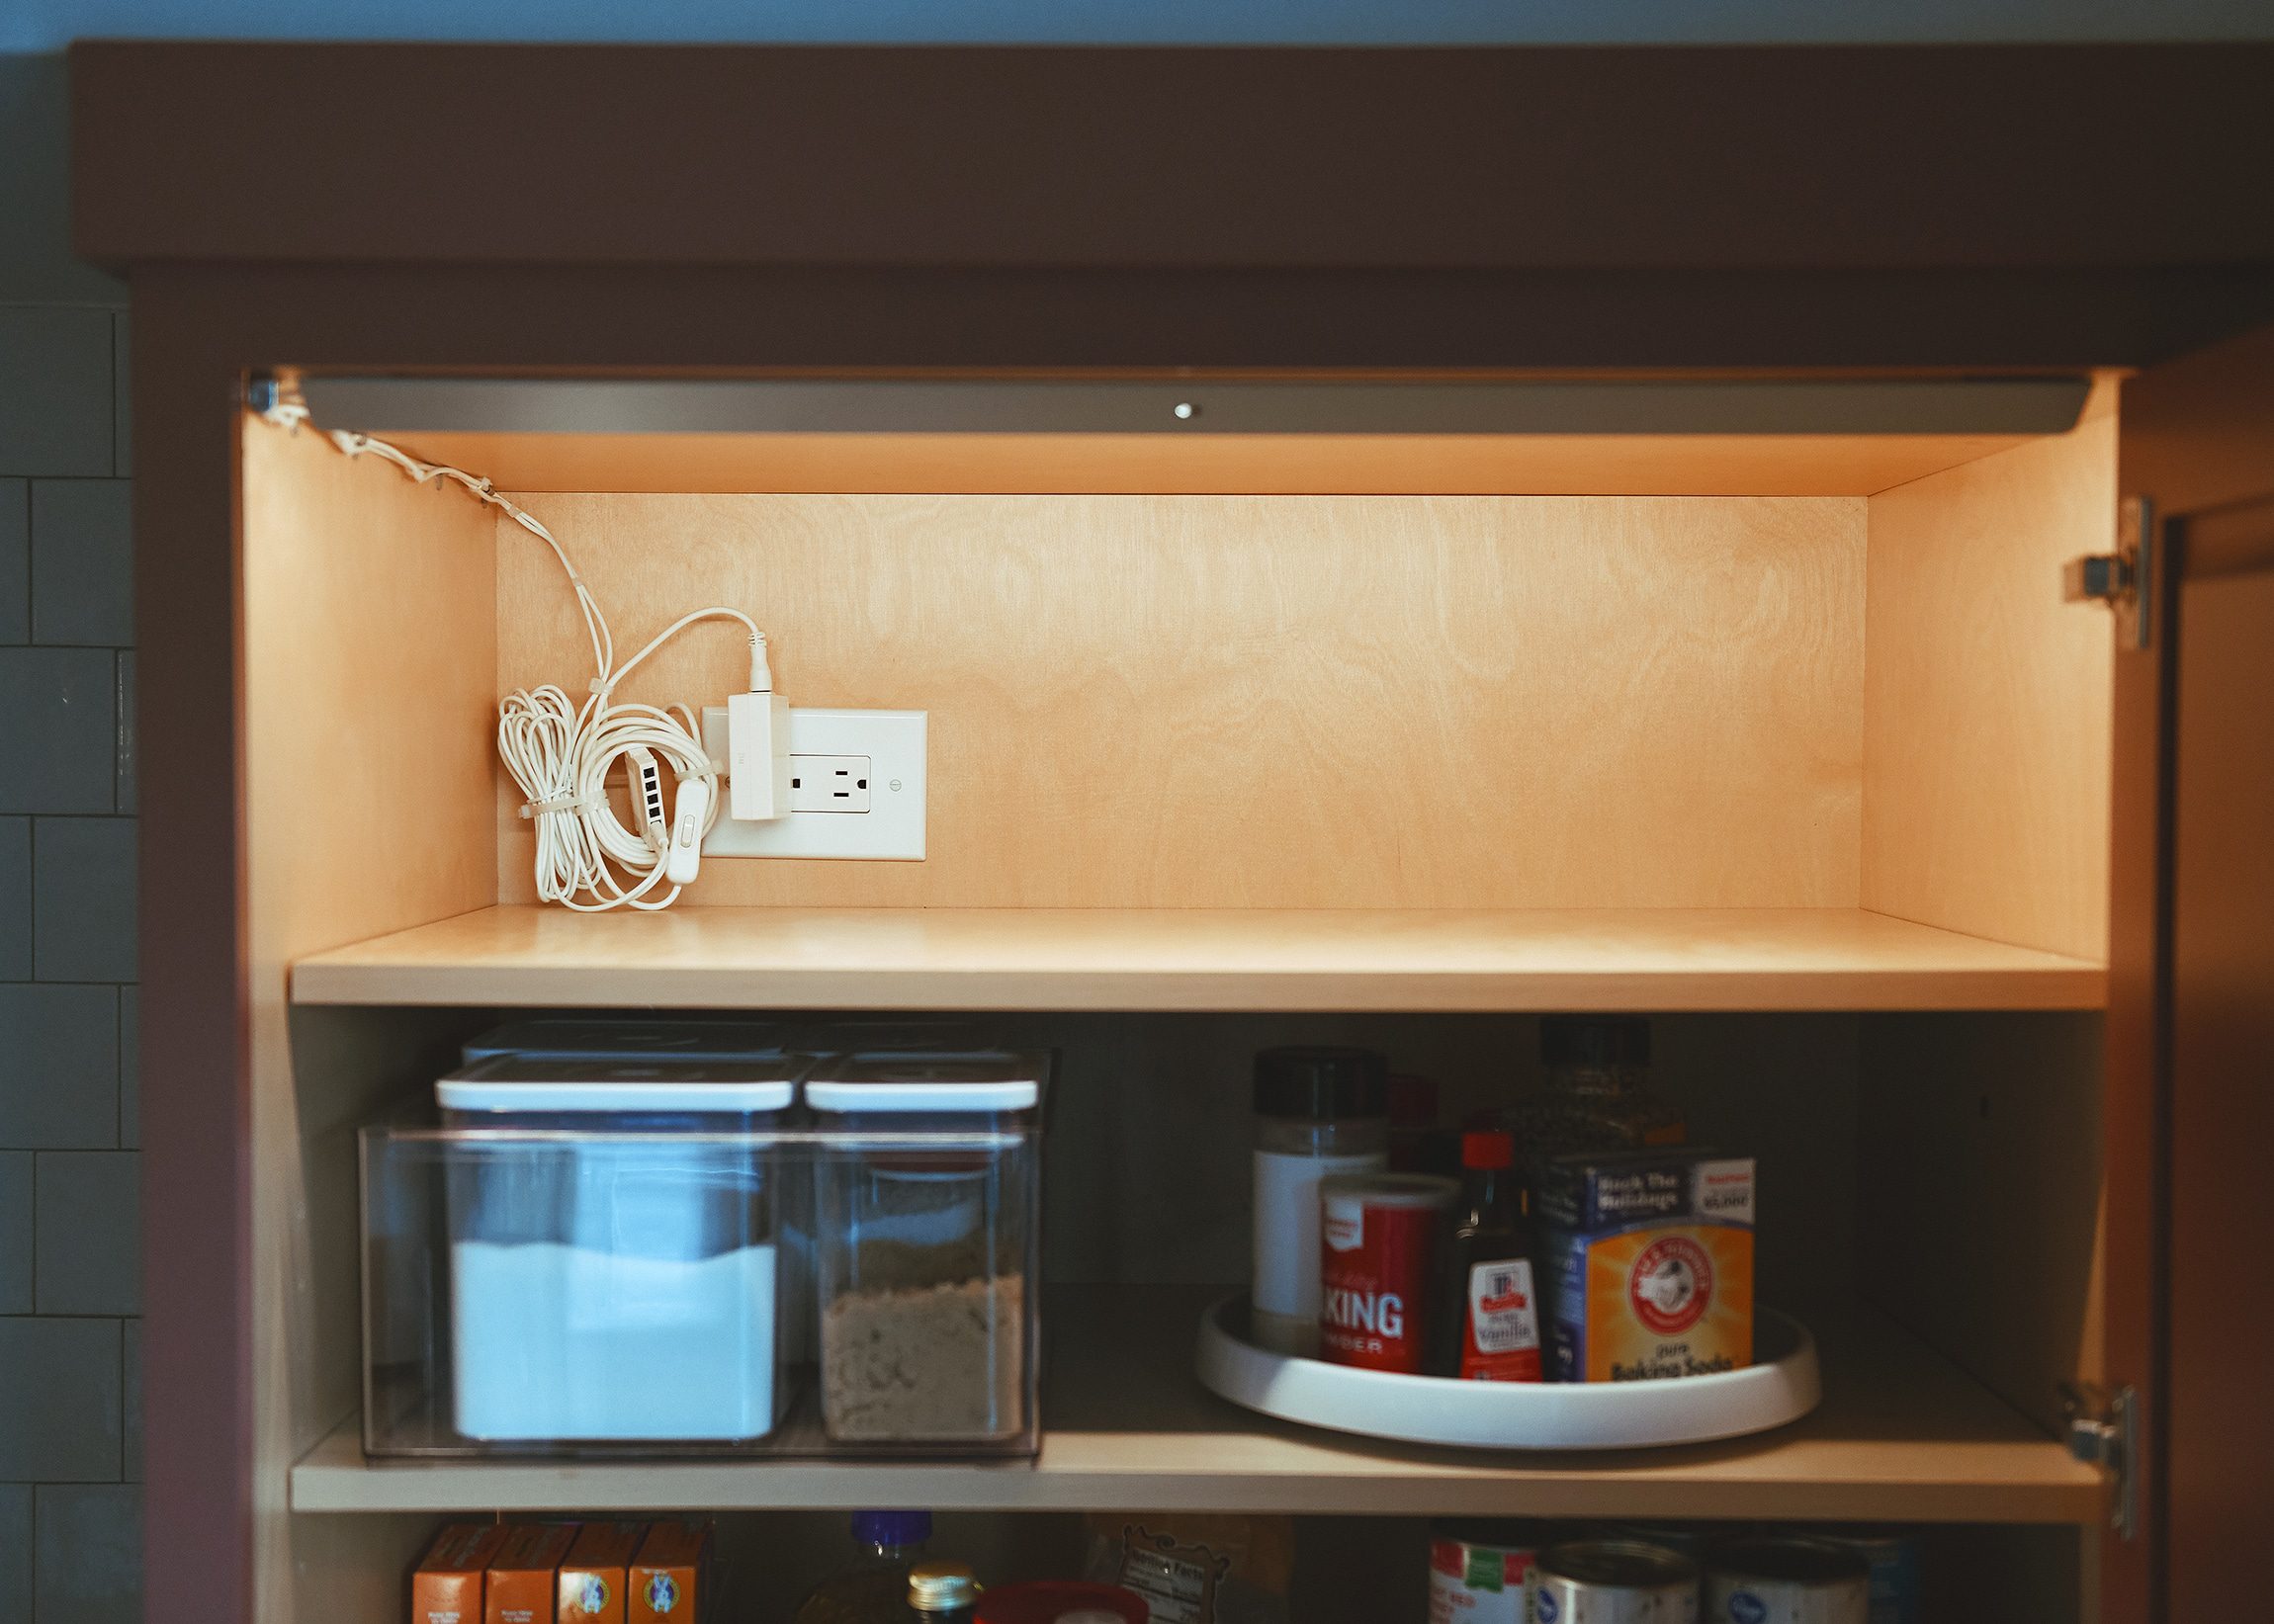 The lights installed with the cables tidy and organized  // via Yellow Brick Home